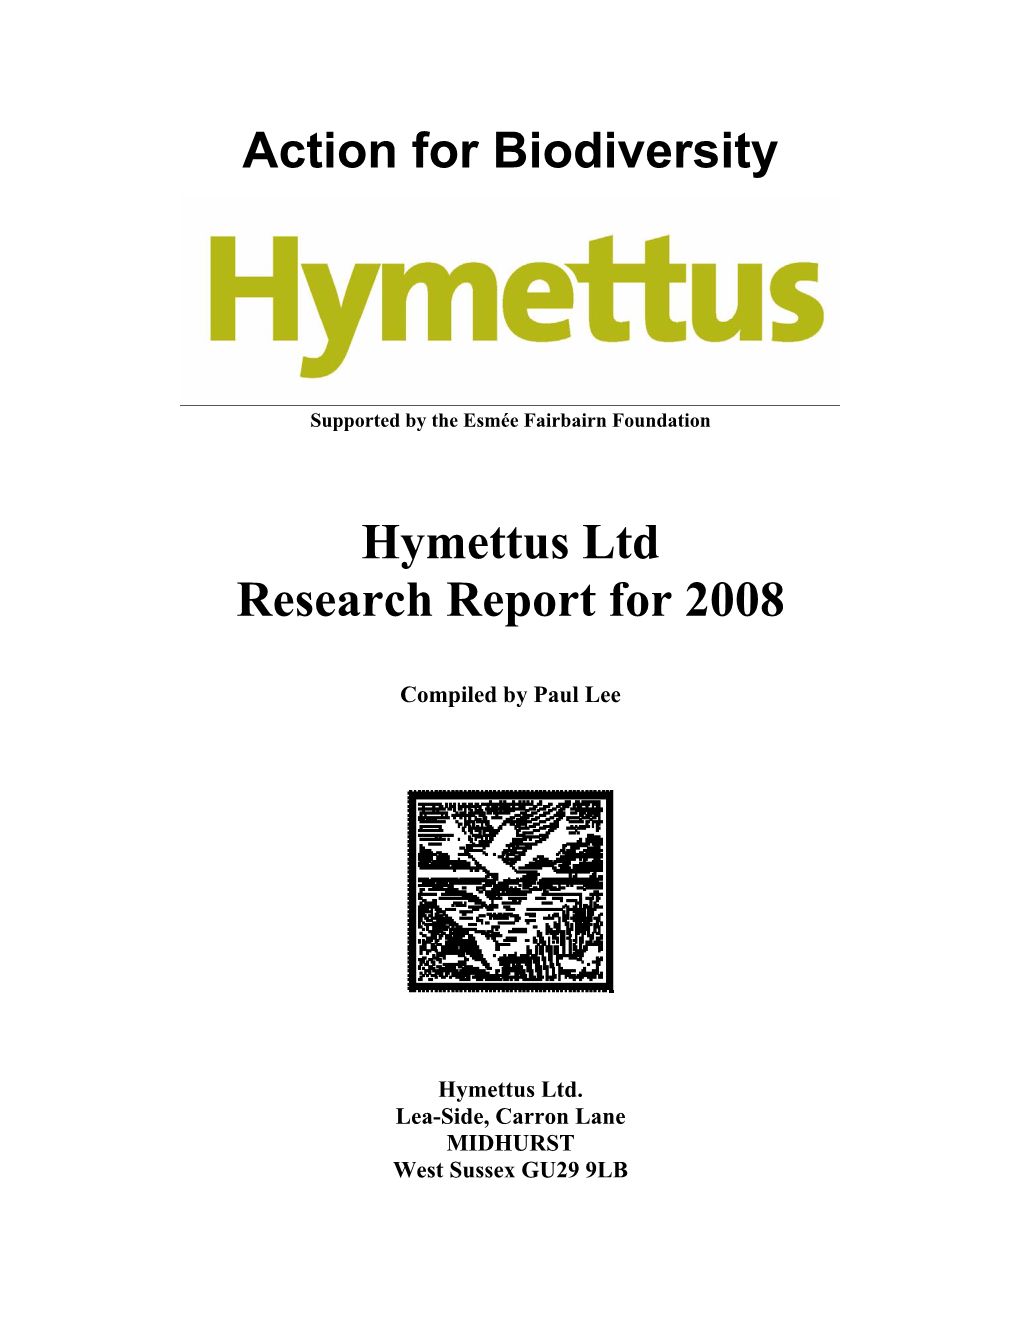 Action for Biodiversity Hymettus Ltd Research Report for 2008